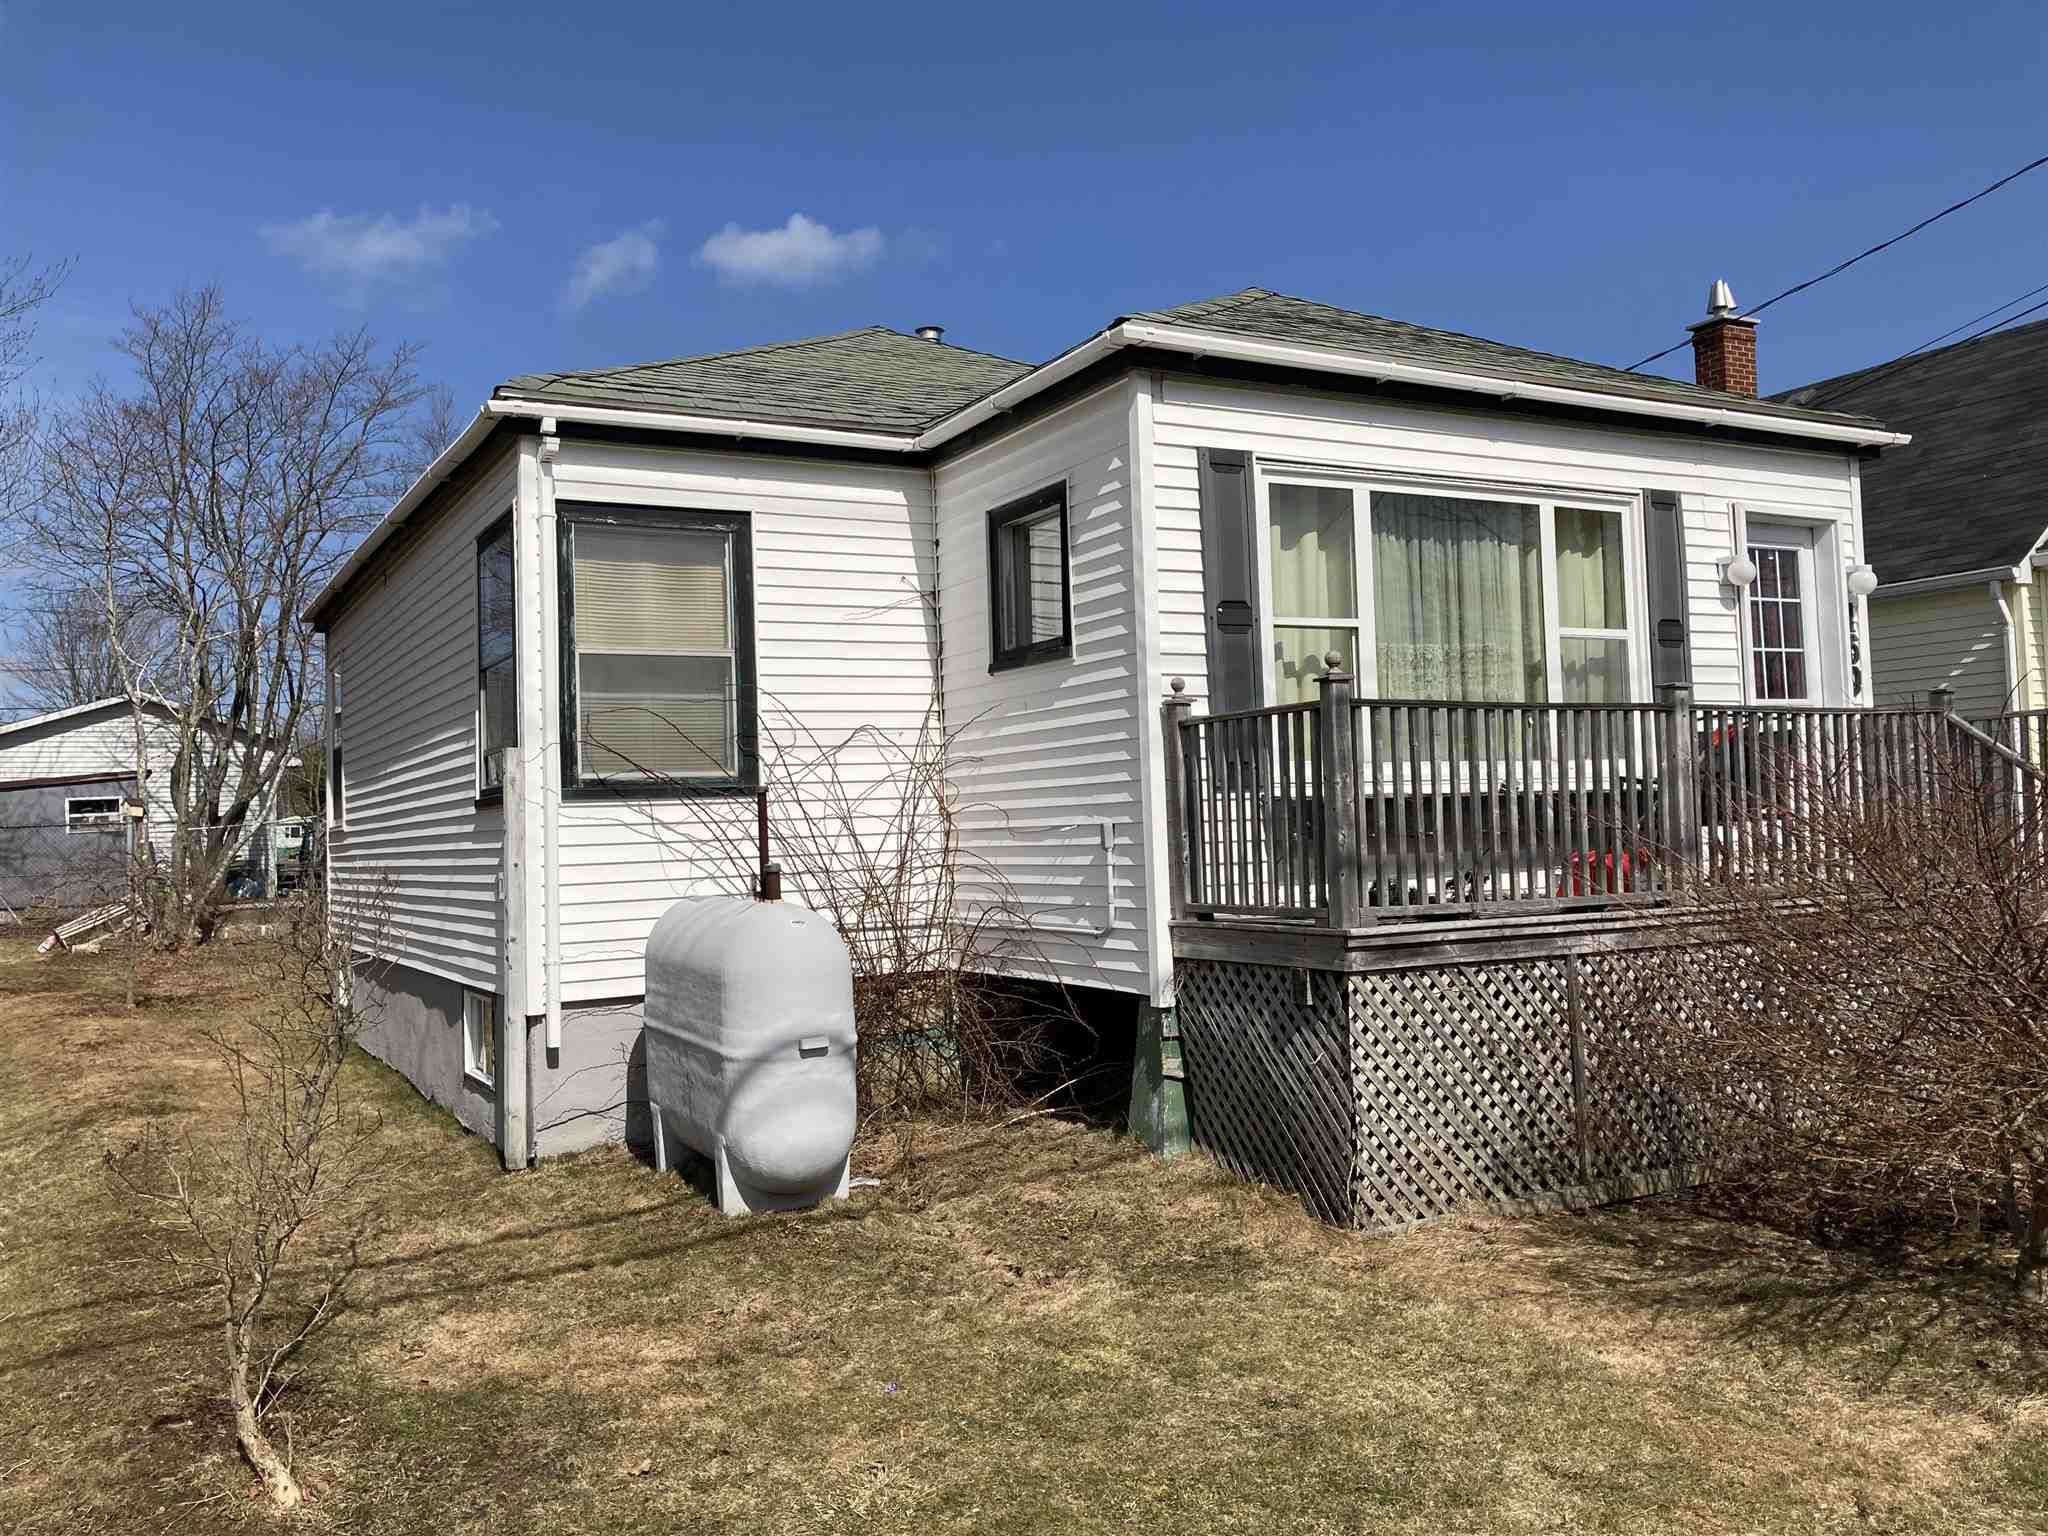 Photo 3: Photos: 169 Main Avenue in Fairview: 6-Fairview Residential for sale (Halifax-Dartmouth)  : MLS®# 202105999